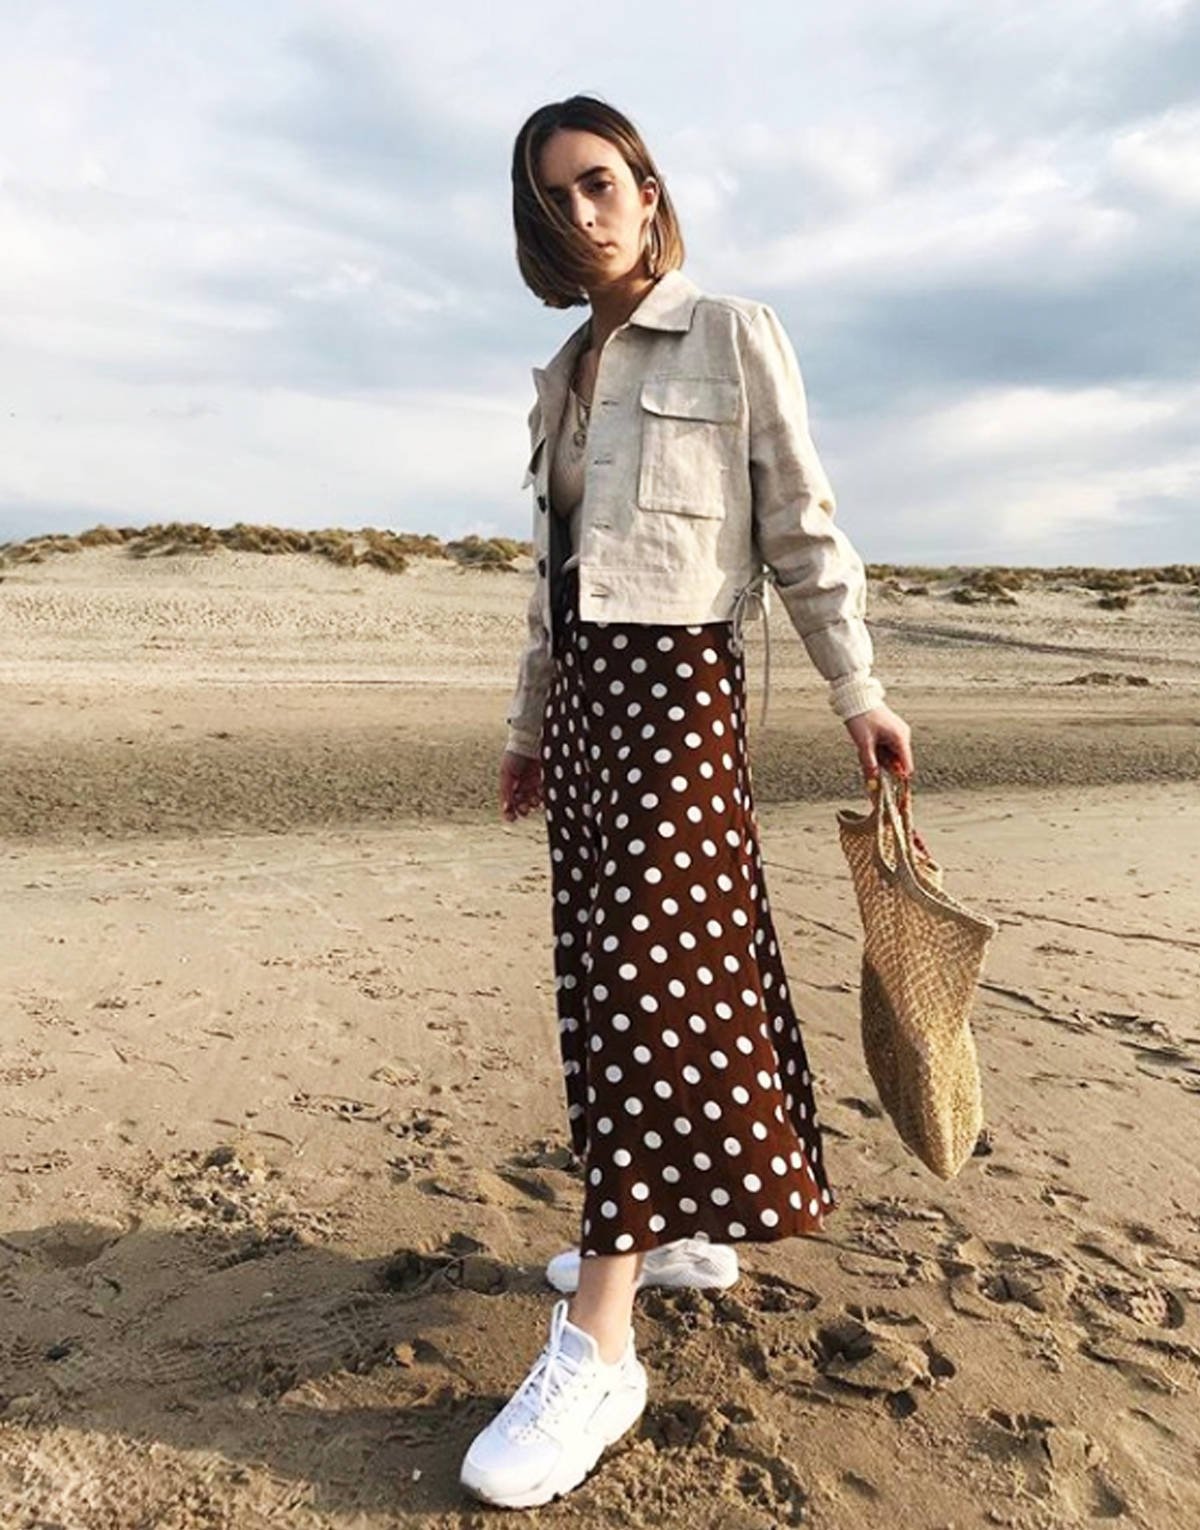 Brown Polka-Dot Outfit Ideas to Try ...